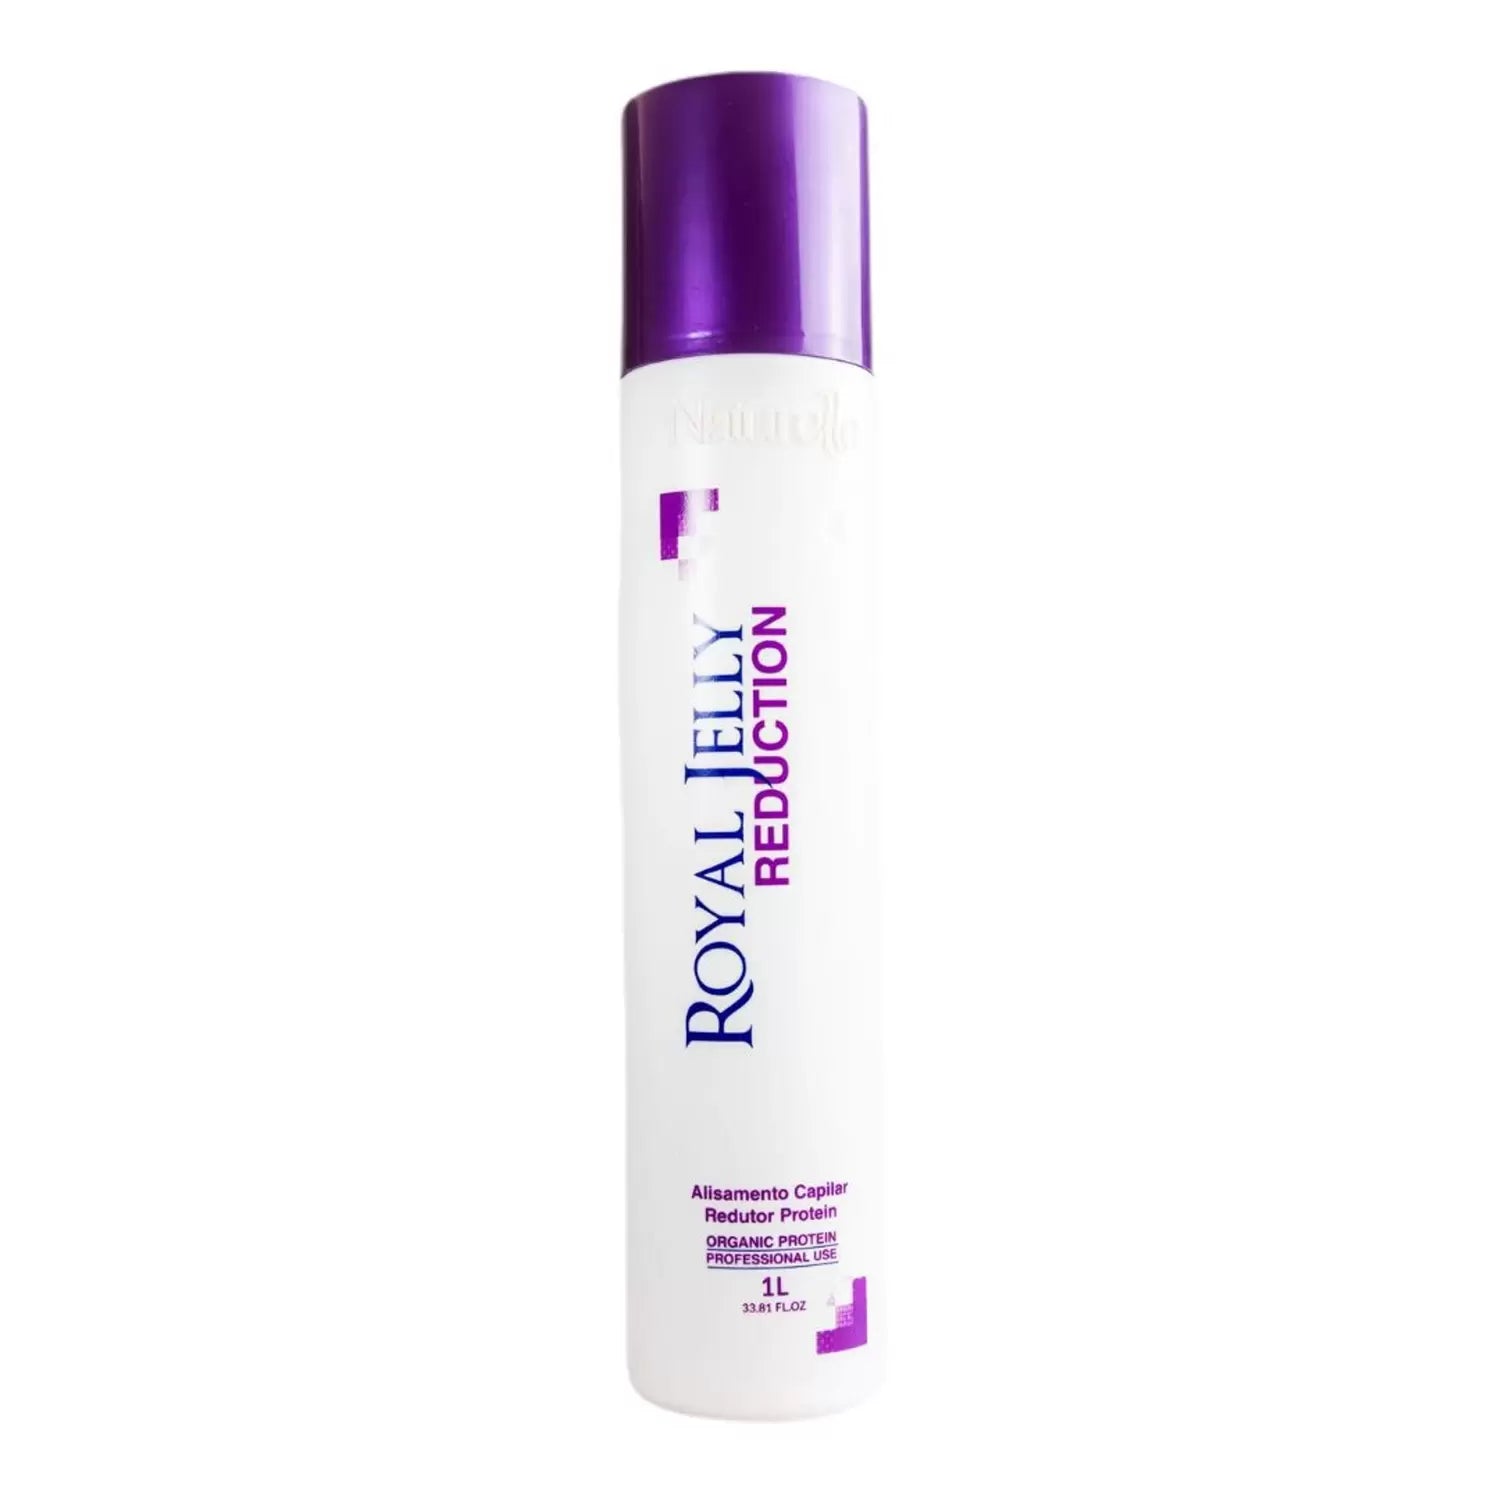 Naturelle, Royal Jelly Reduction, Restoring Conditioner For Hair, 1L